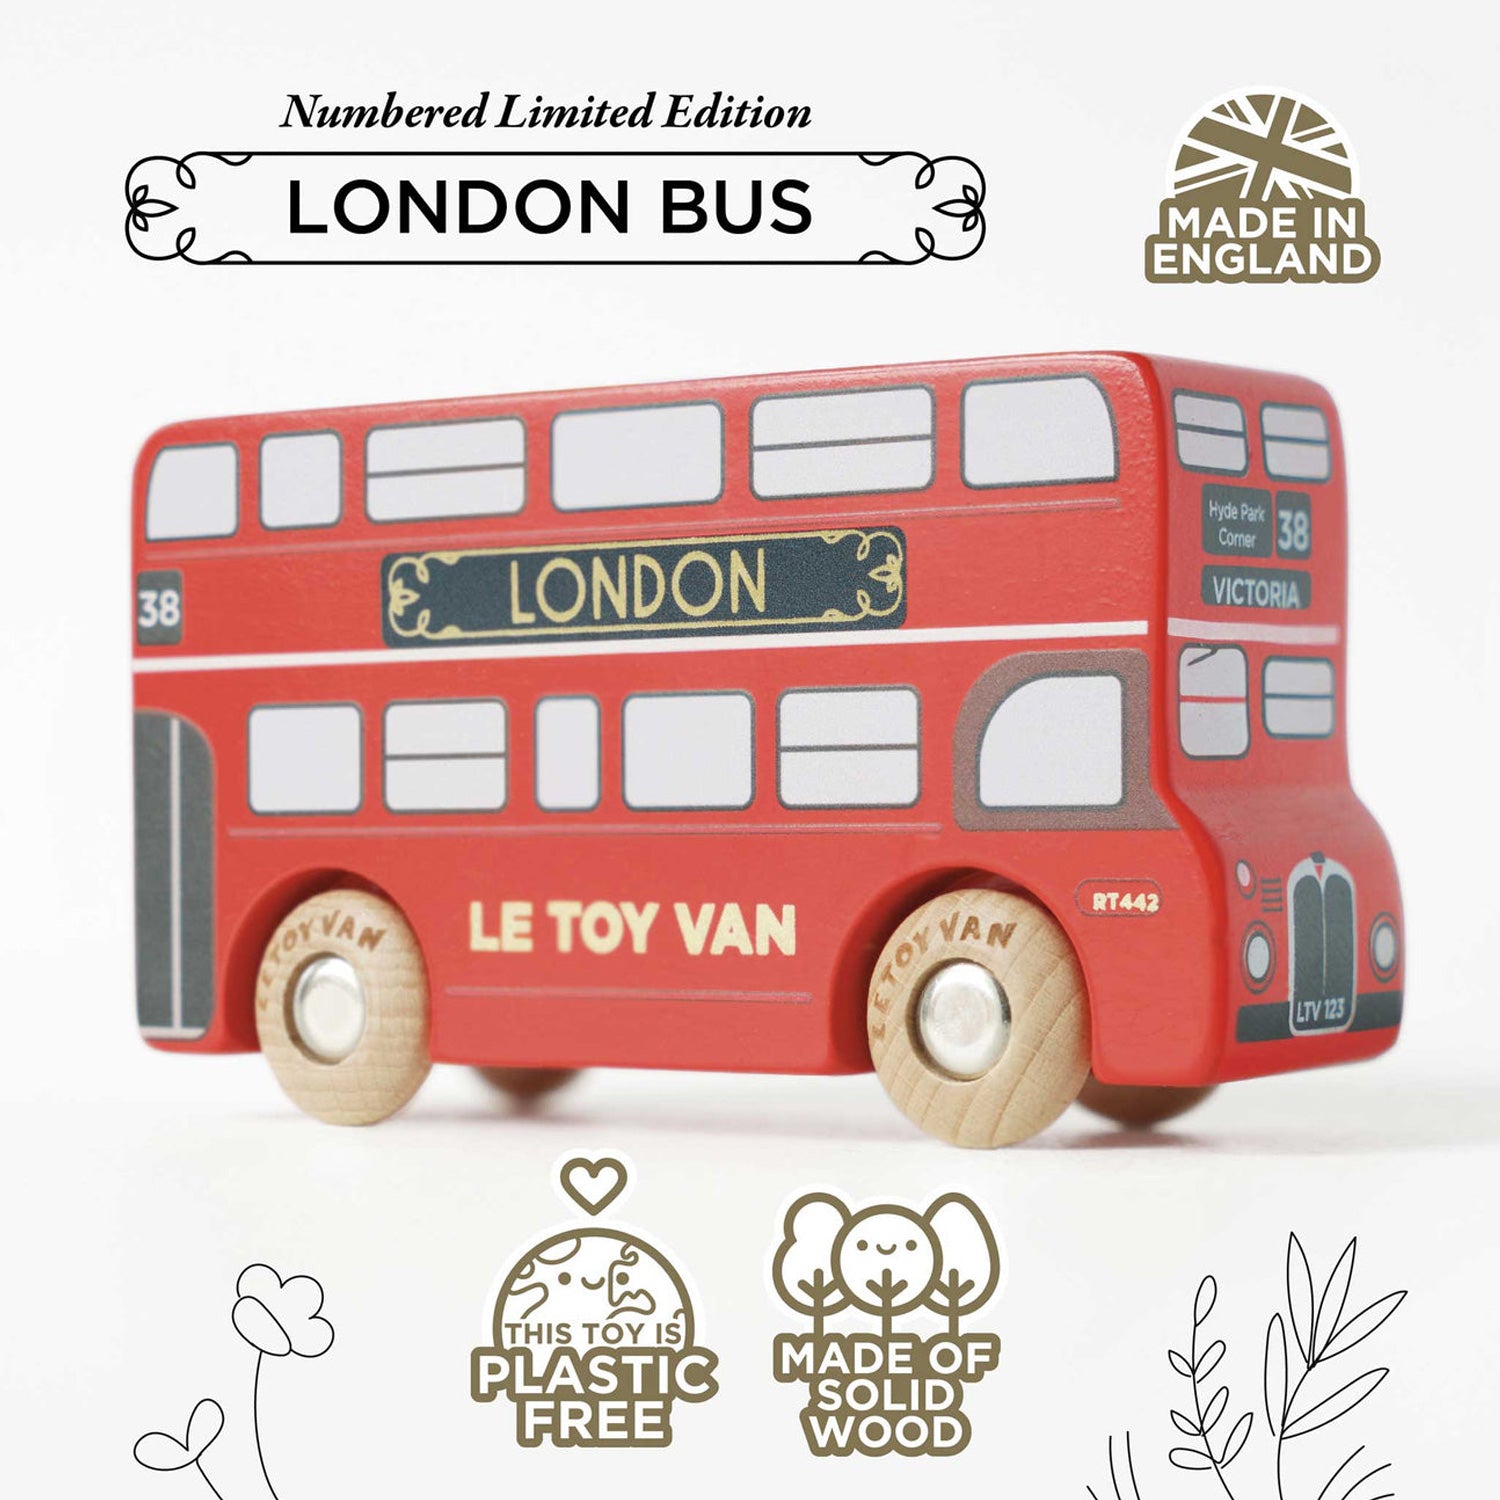 Le Toy Van London Bus Wooden Toy - Numbered Limited Edition 2